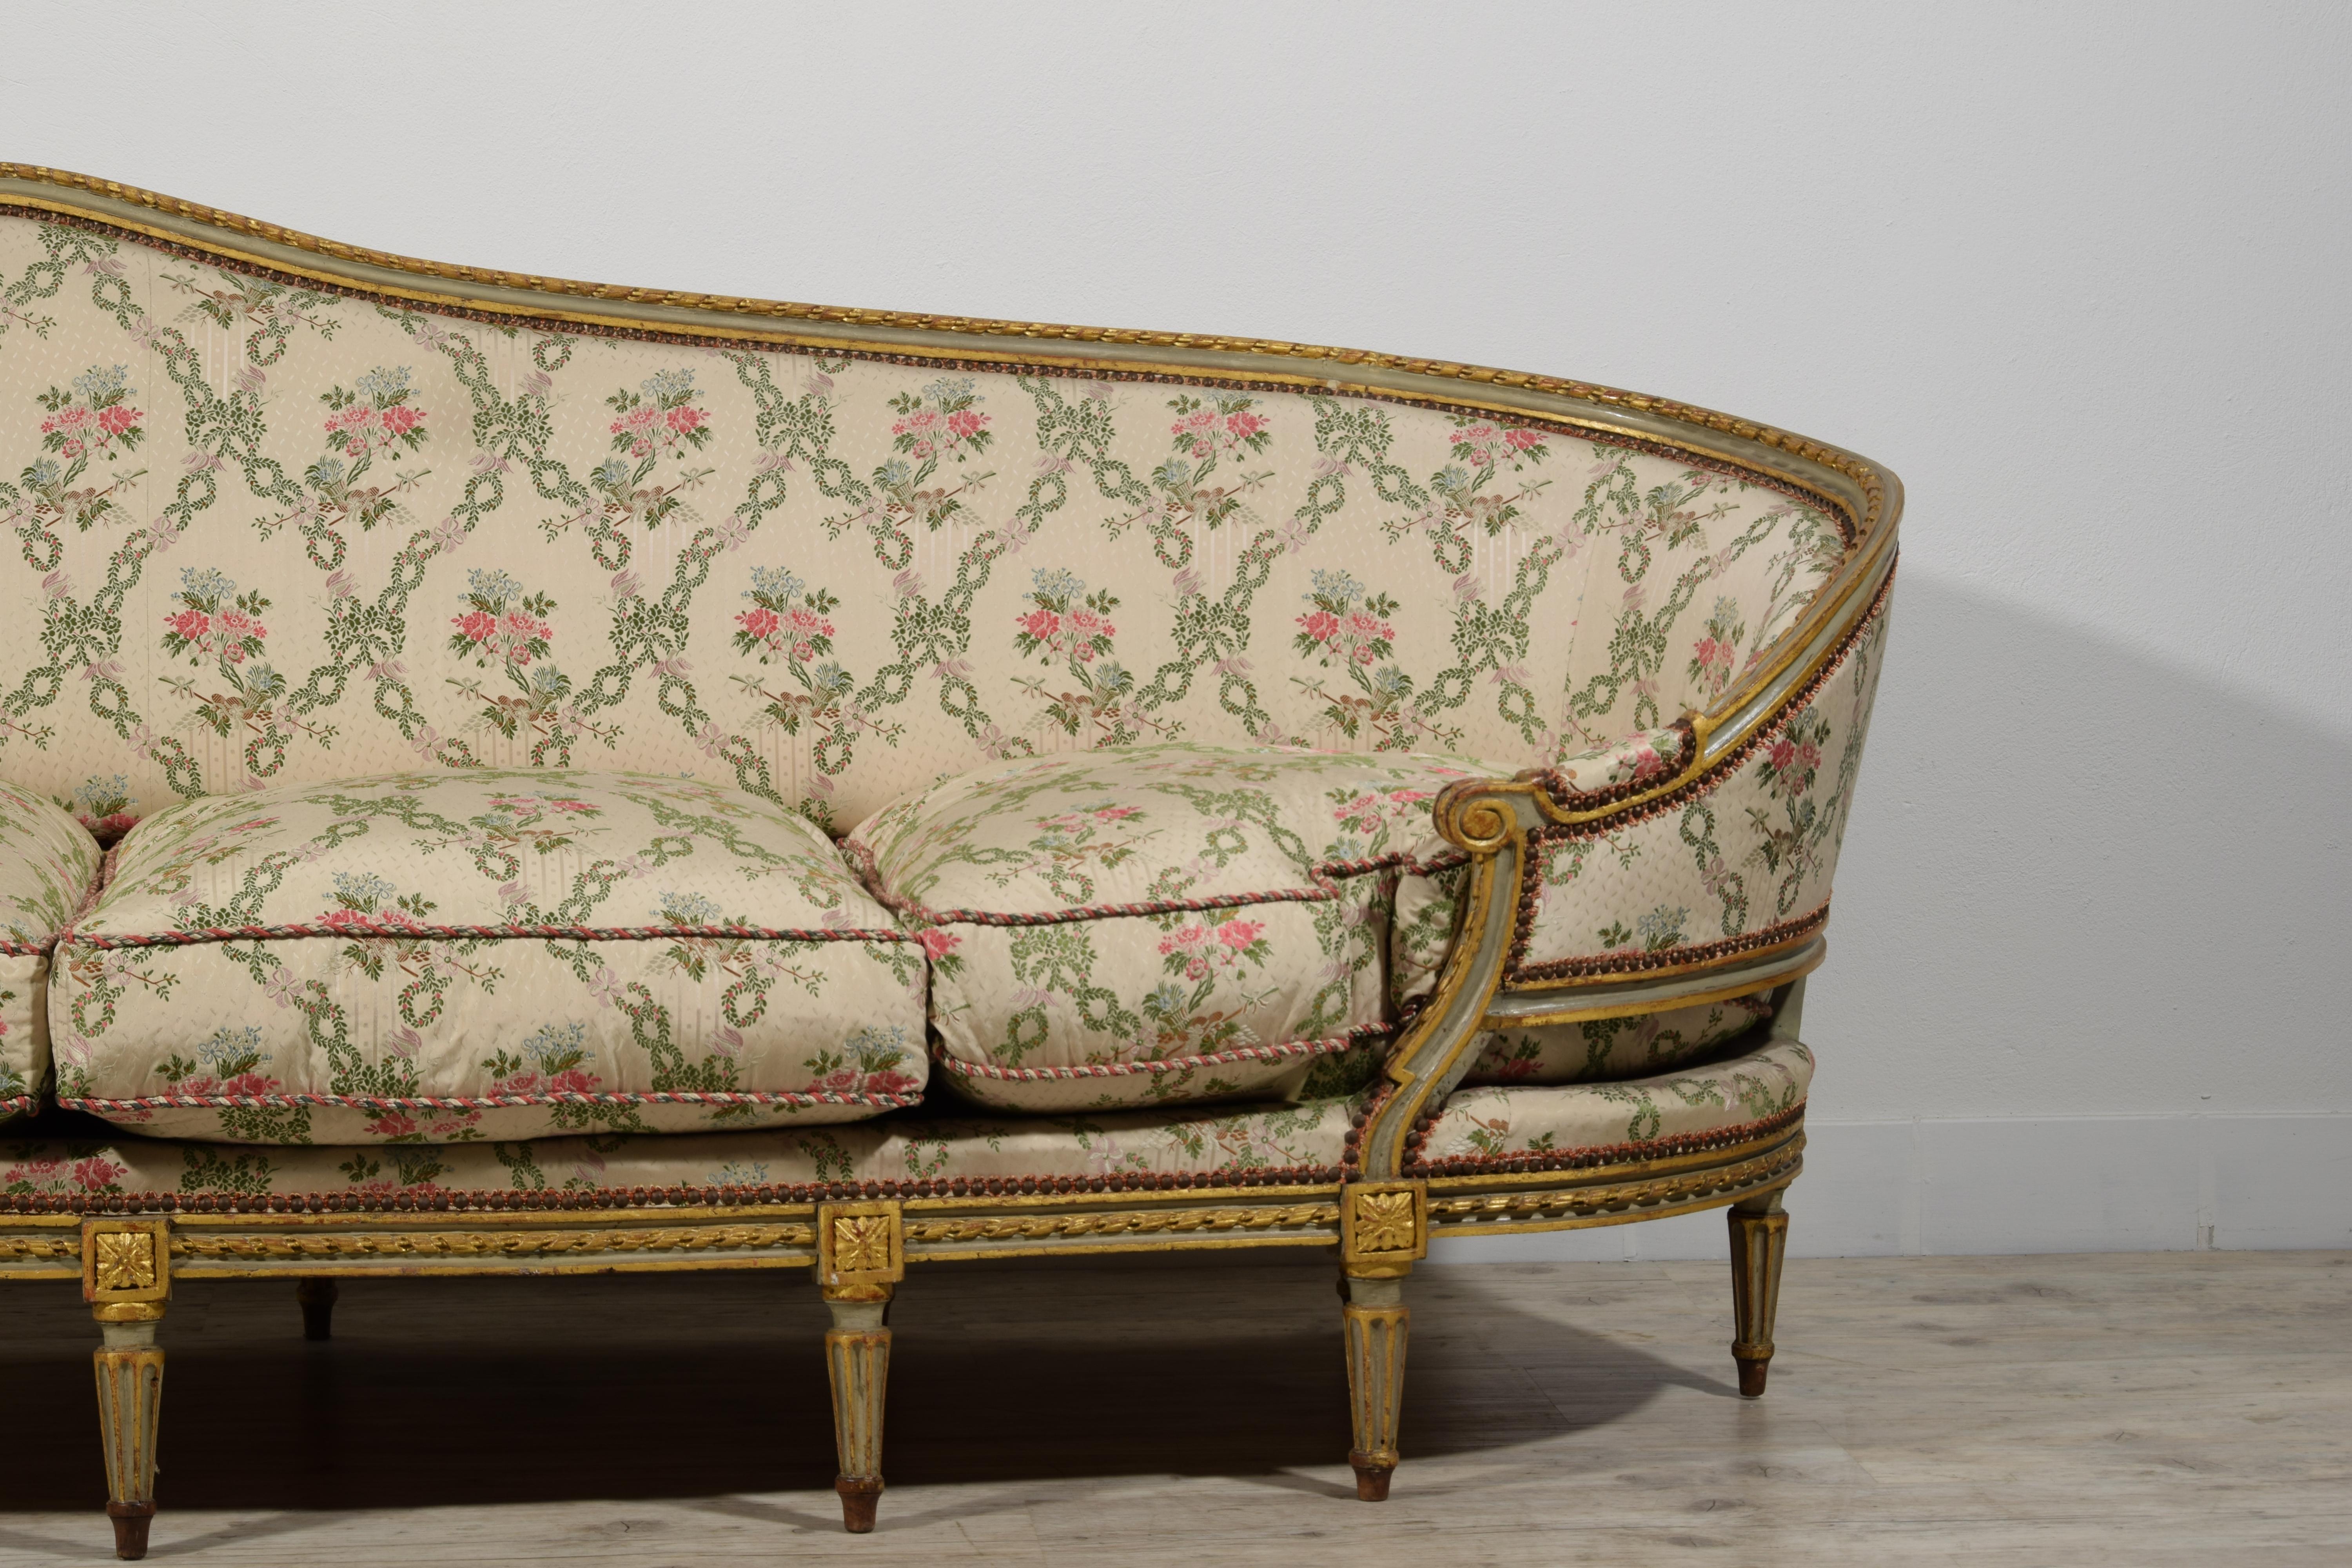 18th Century, French Laquered Giltwood Louis XVI Sofa by Pierre Nicolas Pillot 1